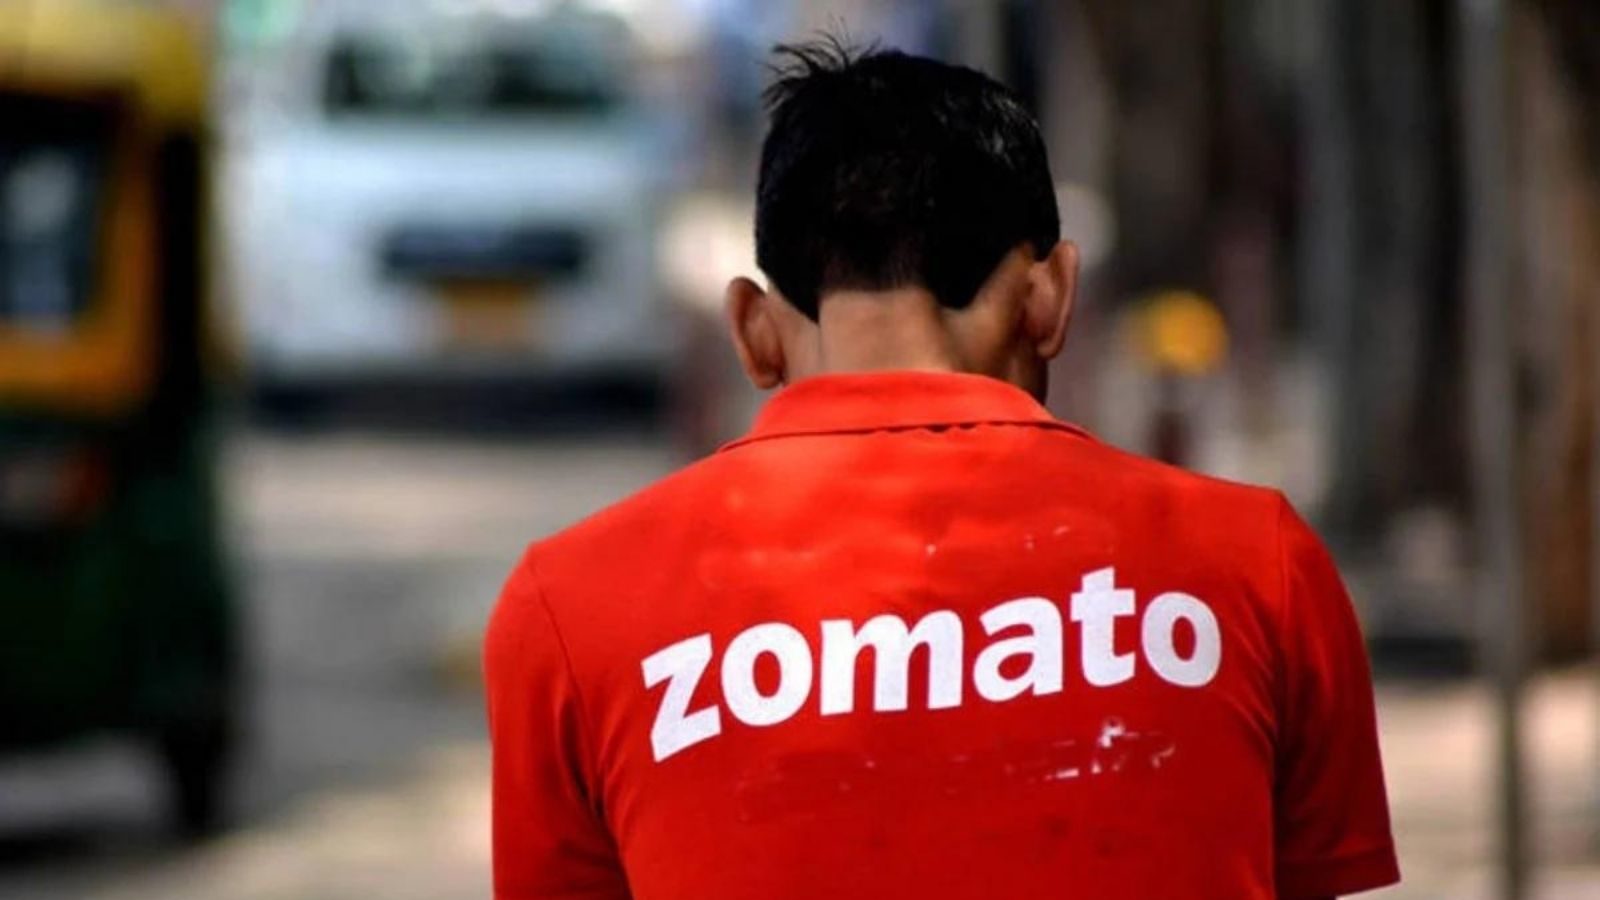 Shares of zomato fell below Rs 100 for the first time.